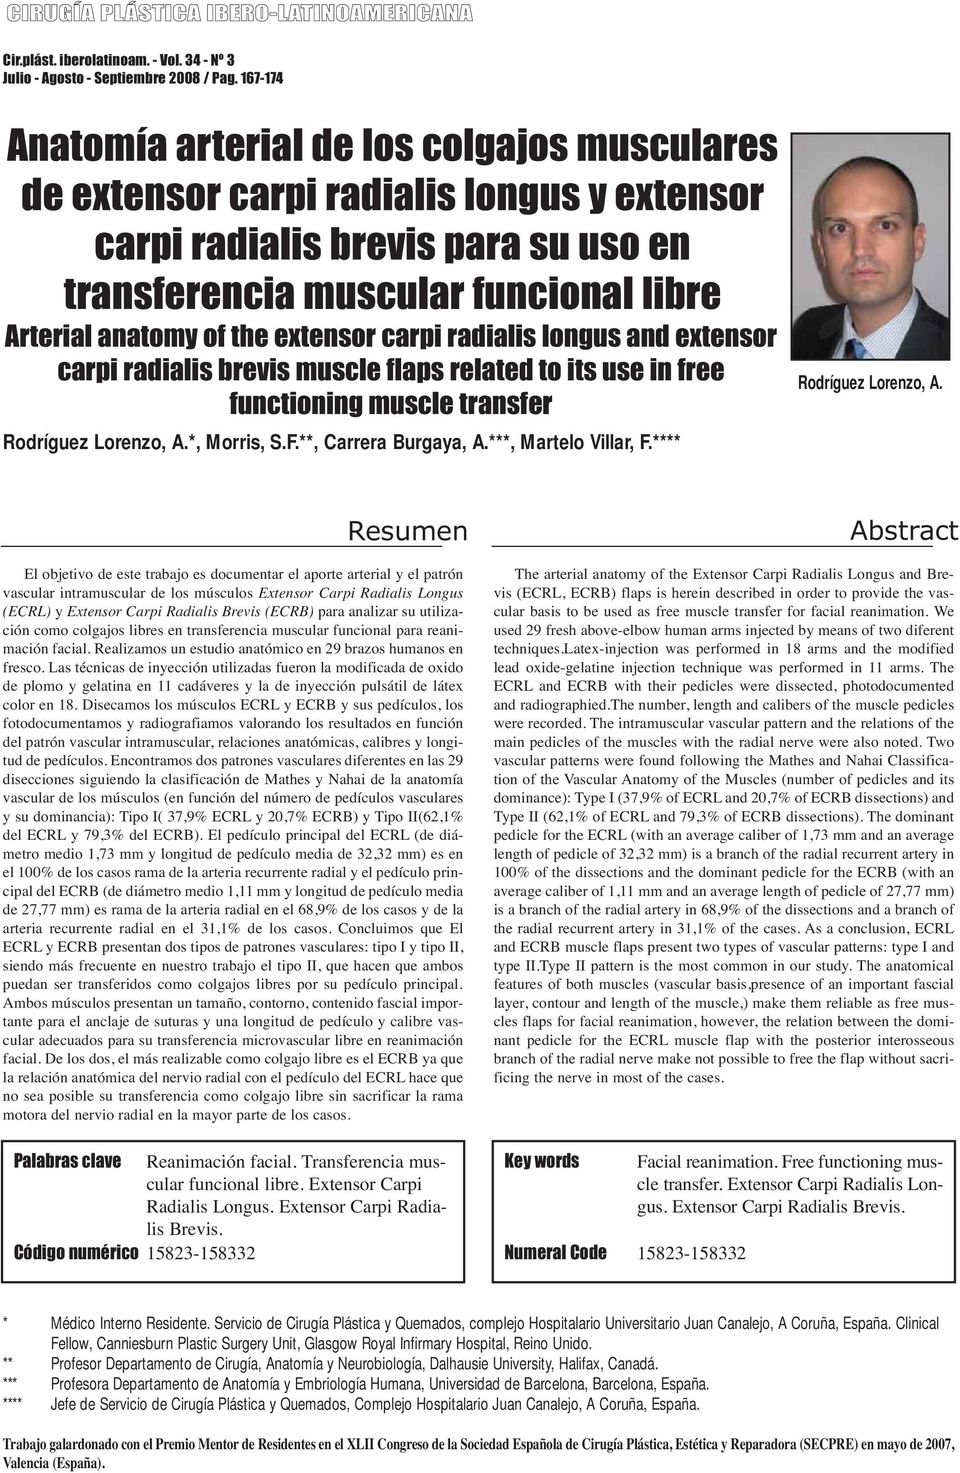 extensor carpi radialis longus and extensor carpi radialis brevis muscle flaps related to its use in free functioning muscle transfer Rodríguez Lorenzo, A.*, Morris, S.F.**, Carrera Burgaya, A.